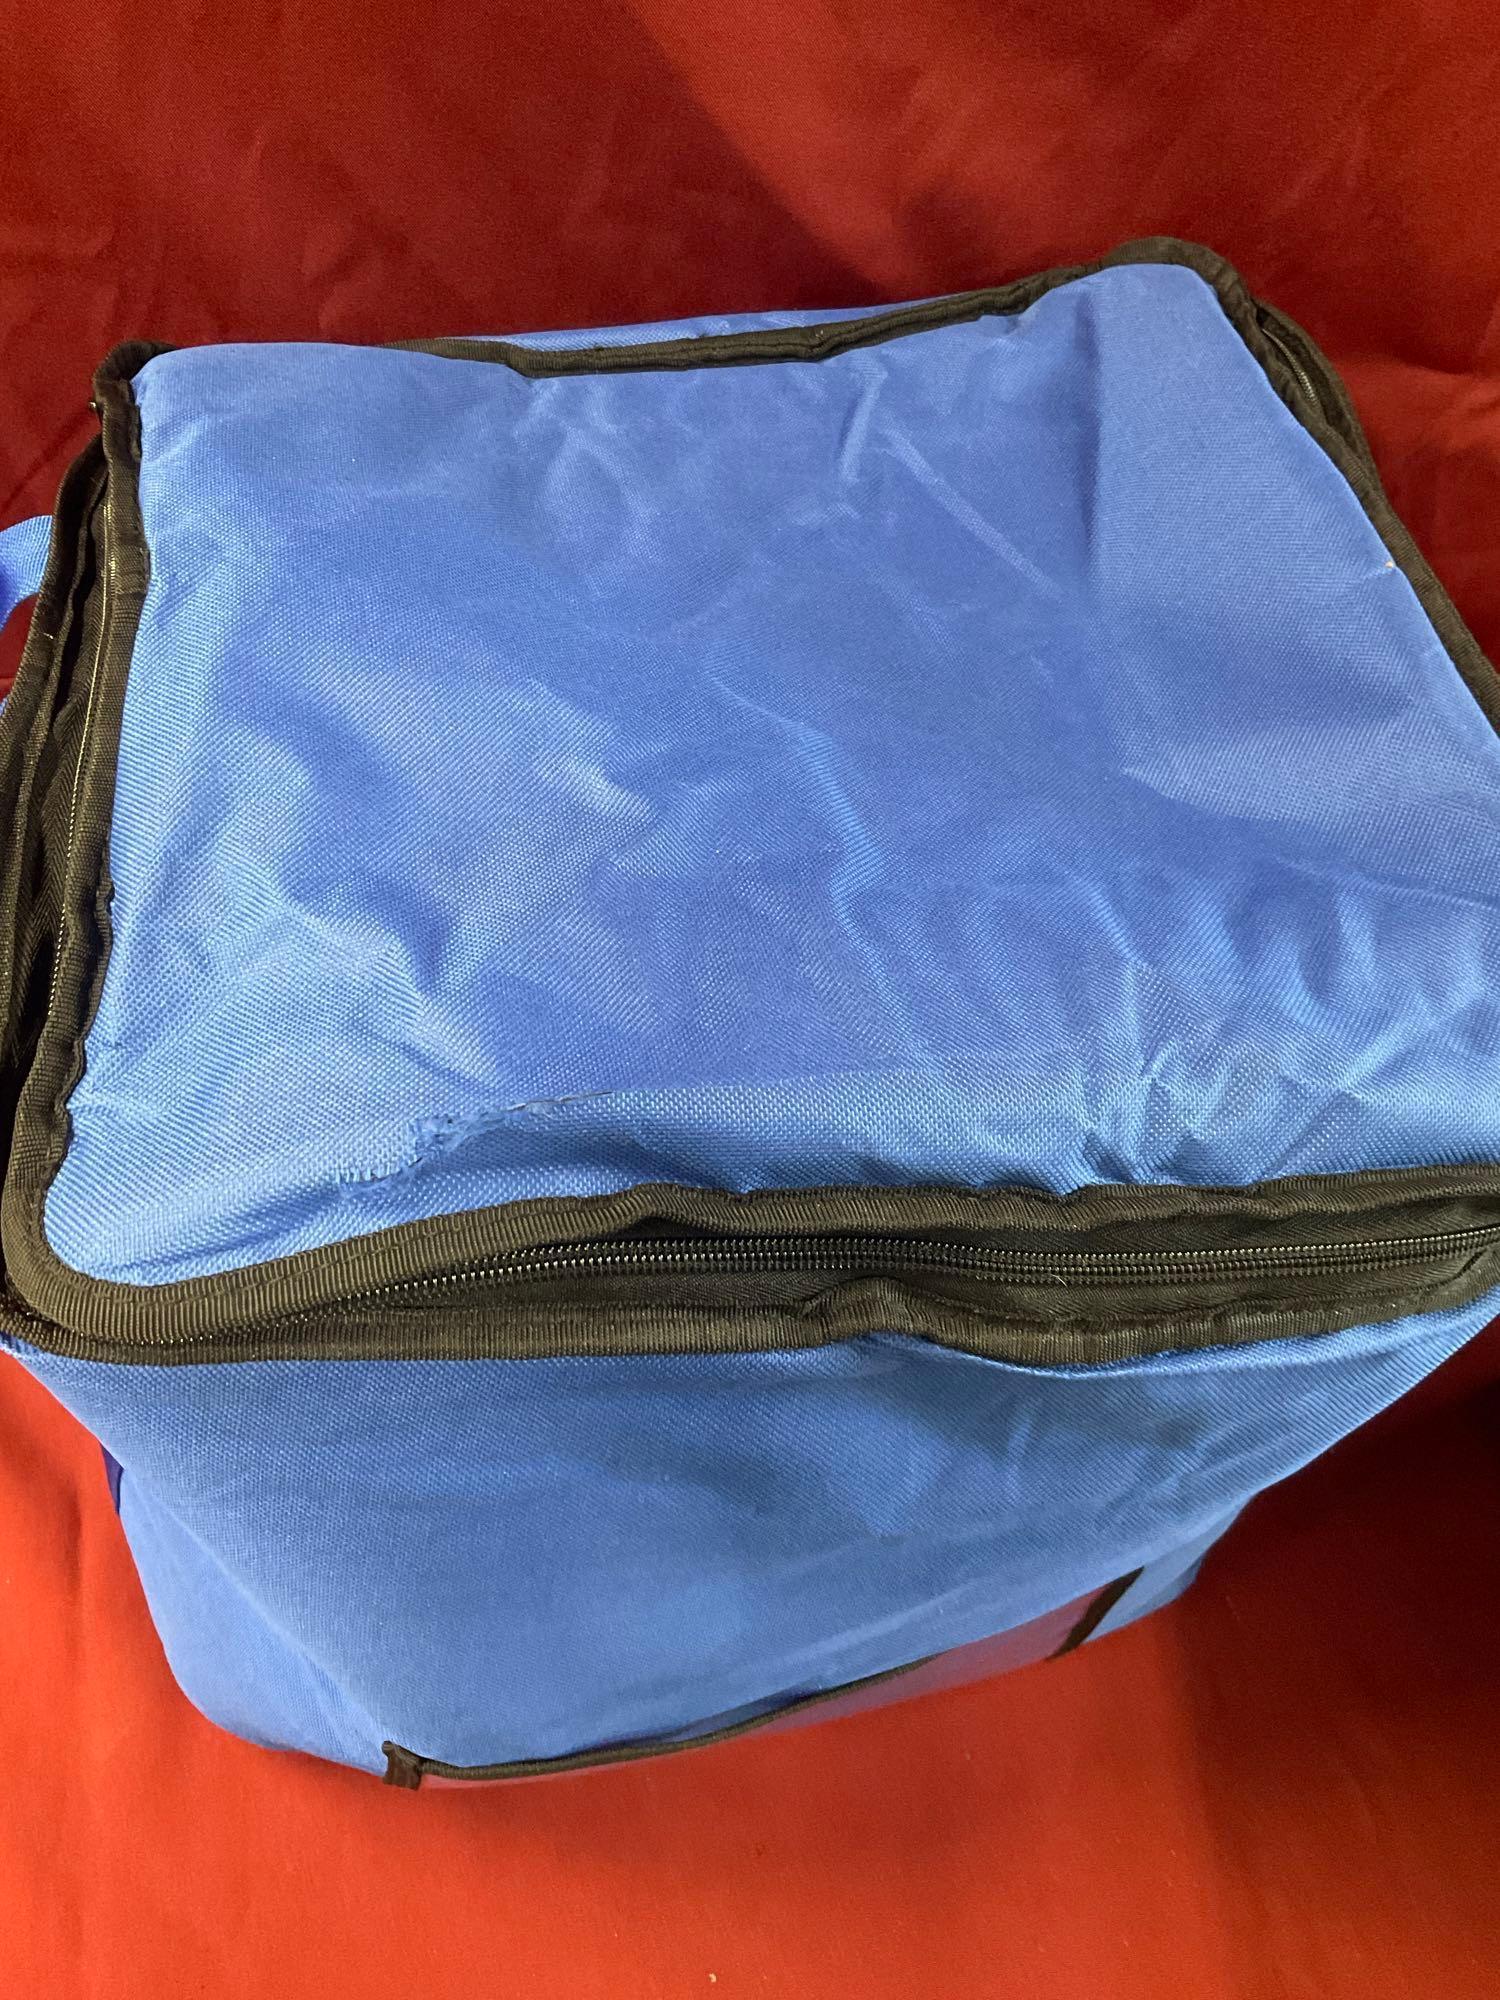 Large hot & cold delivery bag, blue, 2 pieces. One small tear in one